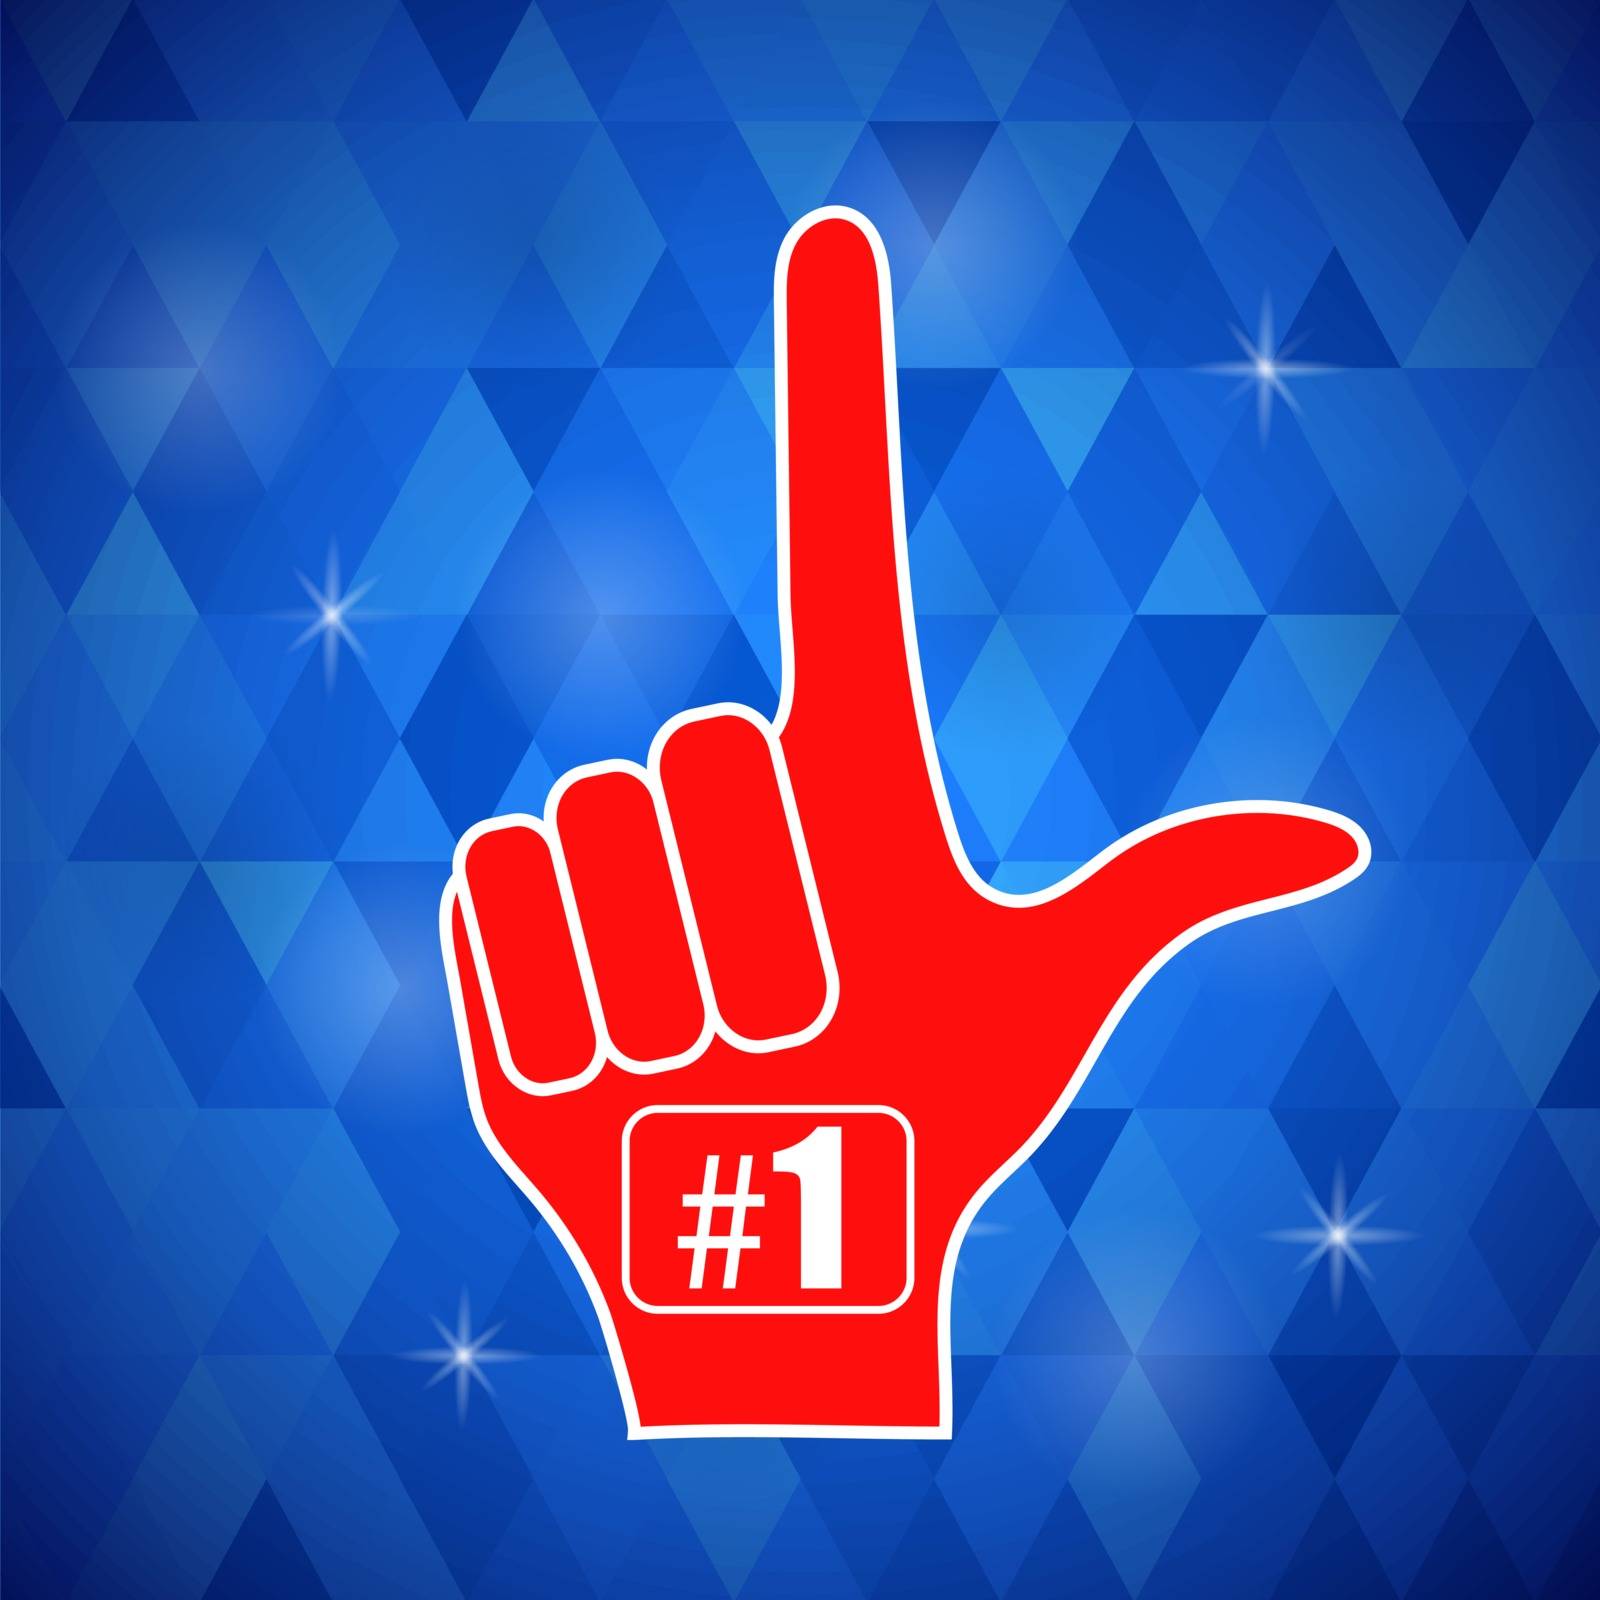 Red  Foam Finger Isolated on Blue Polygonal Background